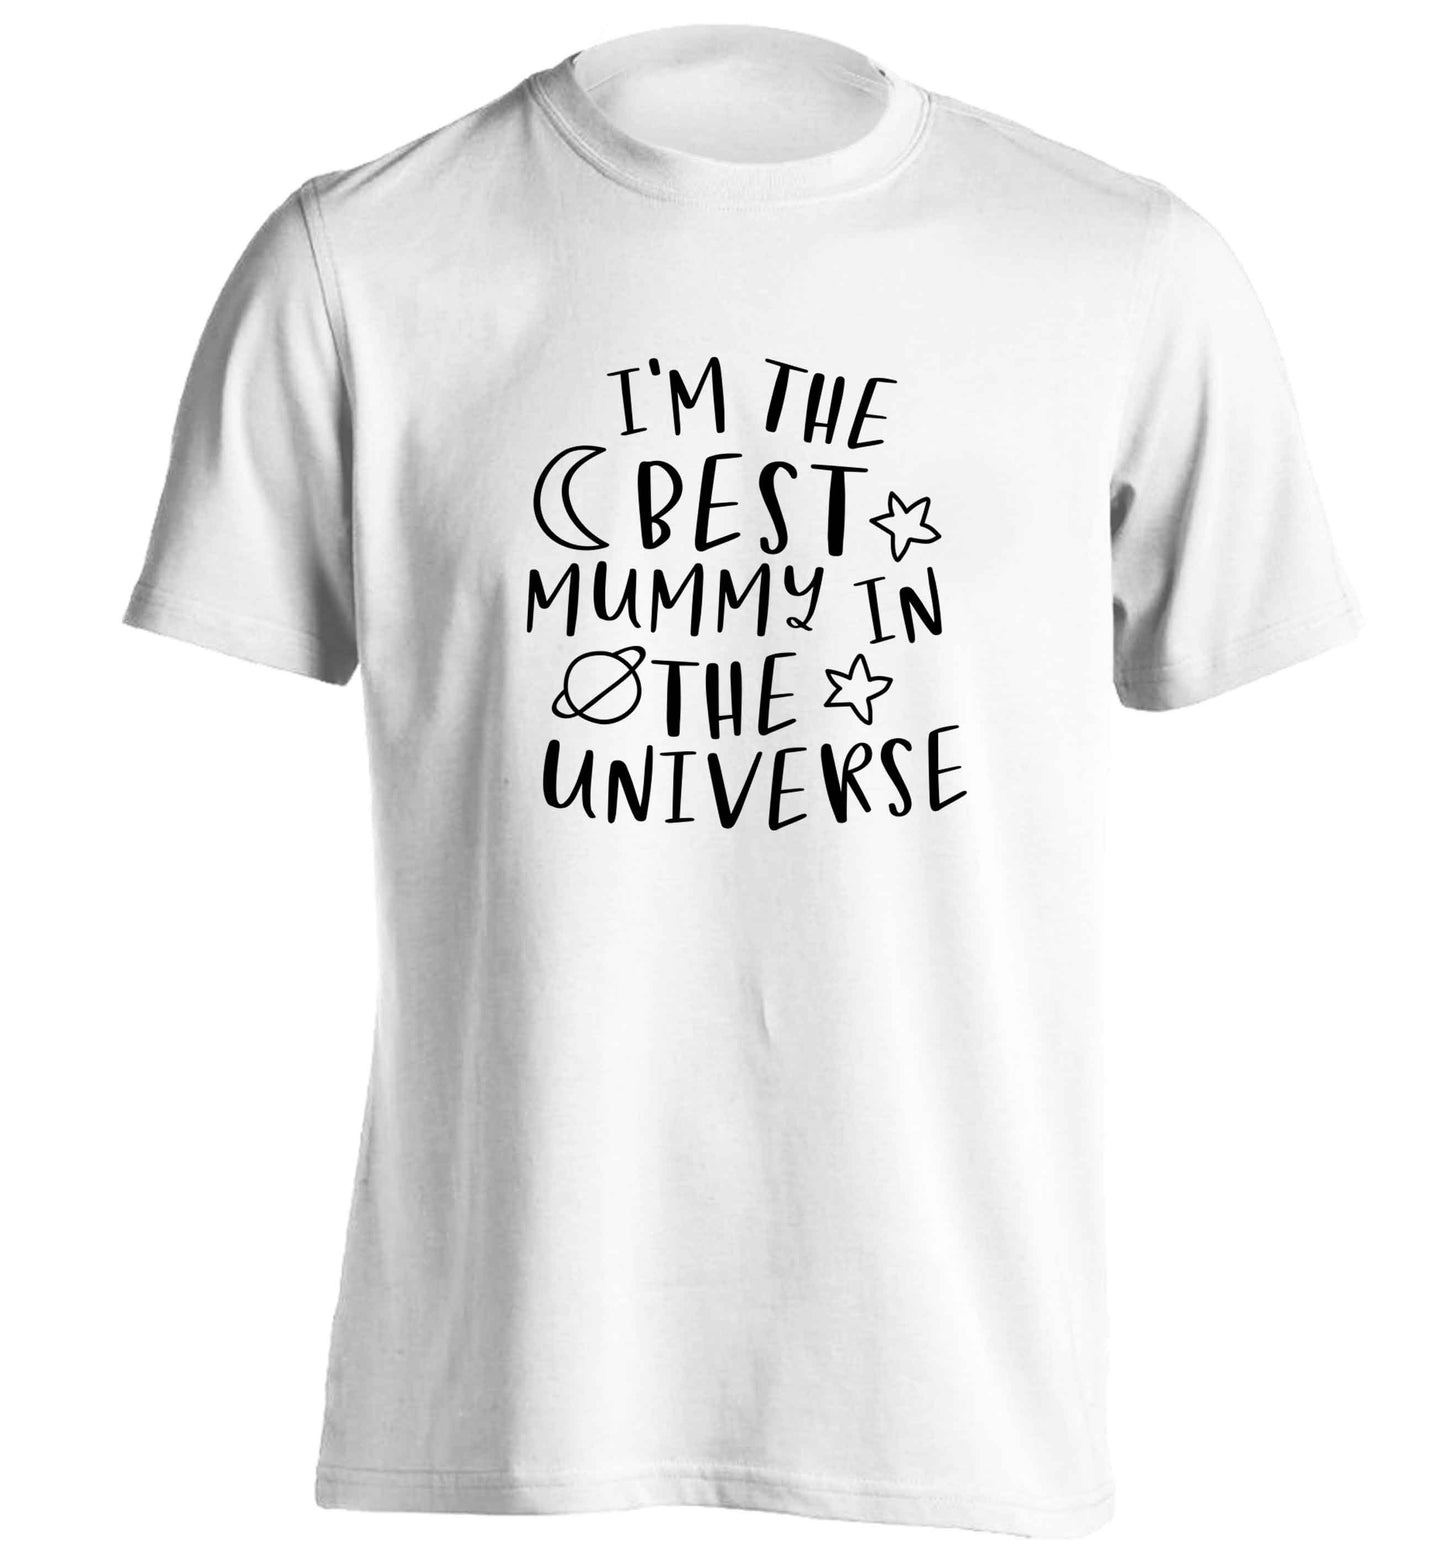 I'm the best mummy in the universe adults unisex white Tshirt 2XL